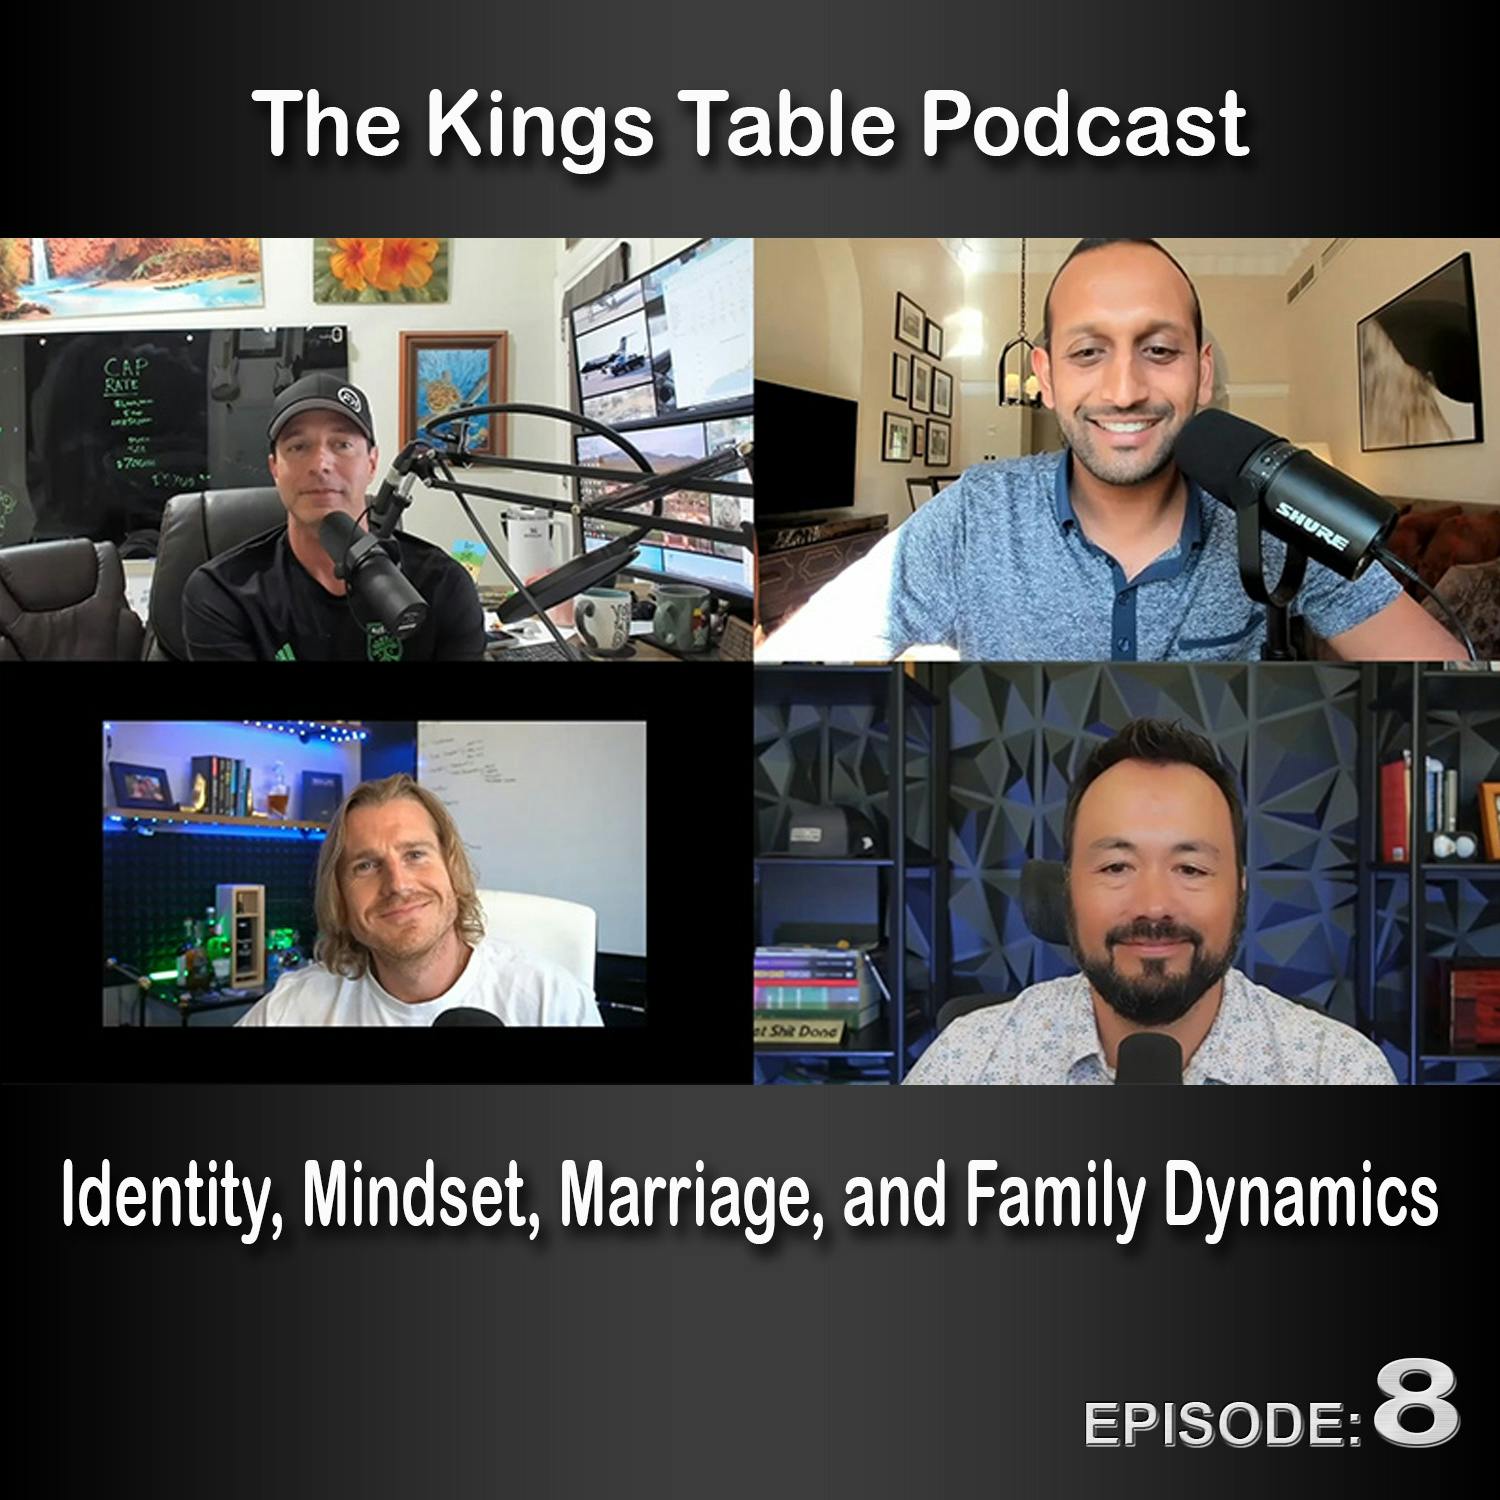 The Kings Table Episode 8 - Identity, Mindset, Marriage, and Family Dynamics